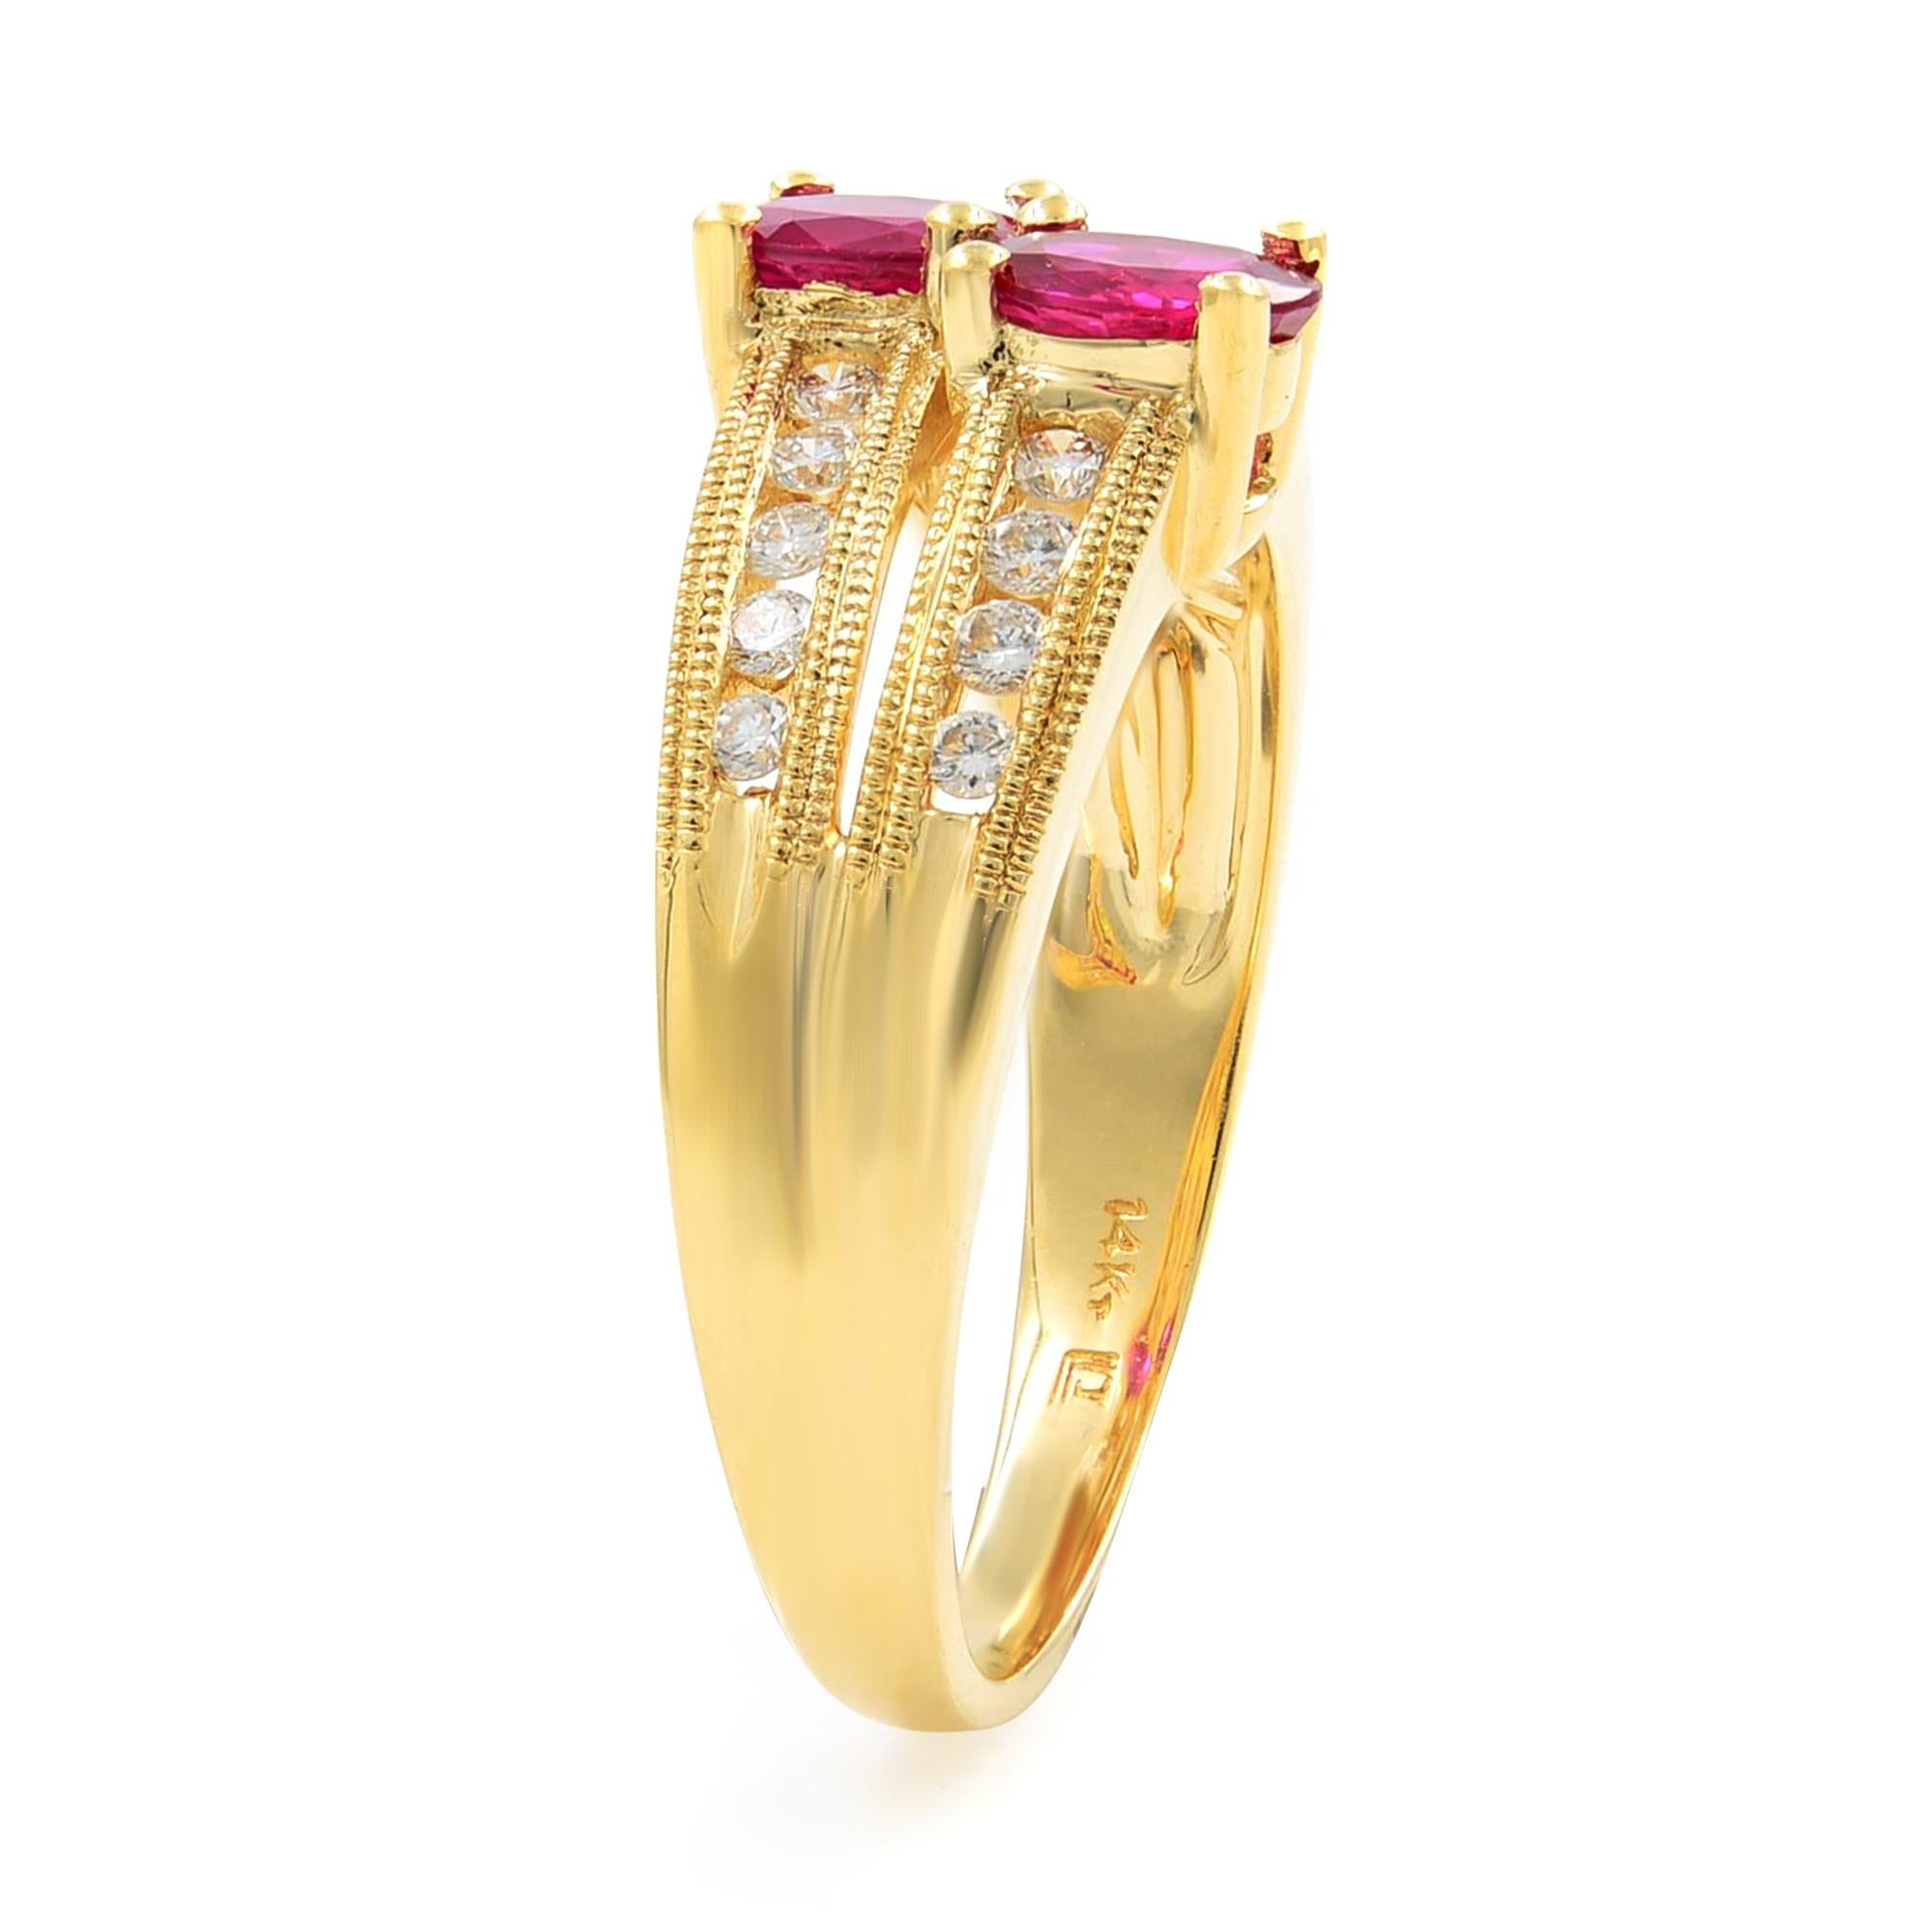 Rachel Koen Ruby 0.95cttw Diamond 0.24cttw Ring 14K Yellow Gold In New Condition For Sale In New York, NY